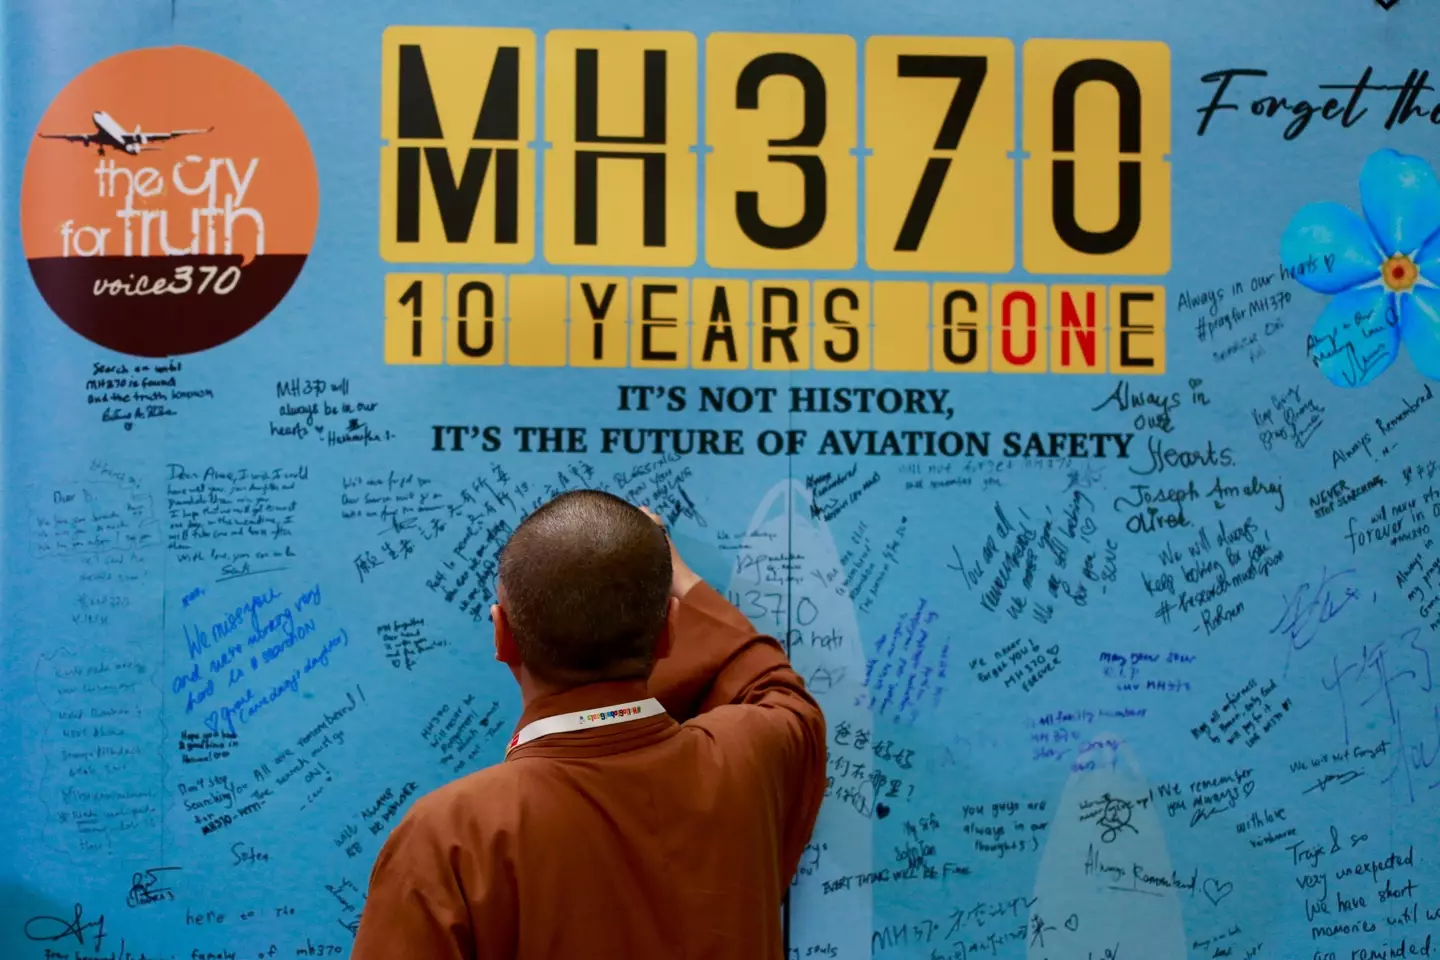 It has now been more than 10 years since MH370 disappeared.